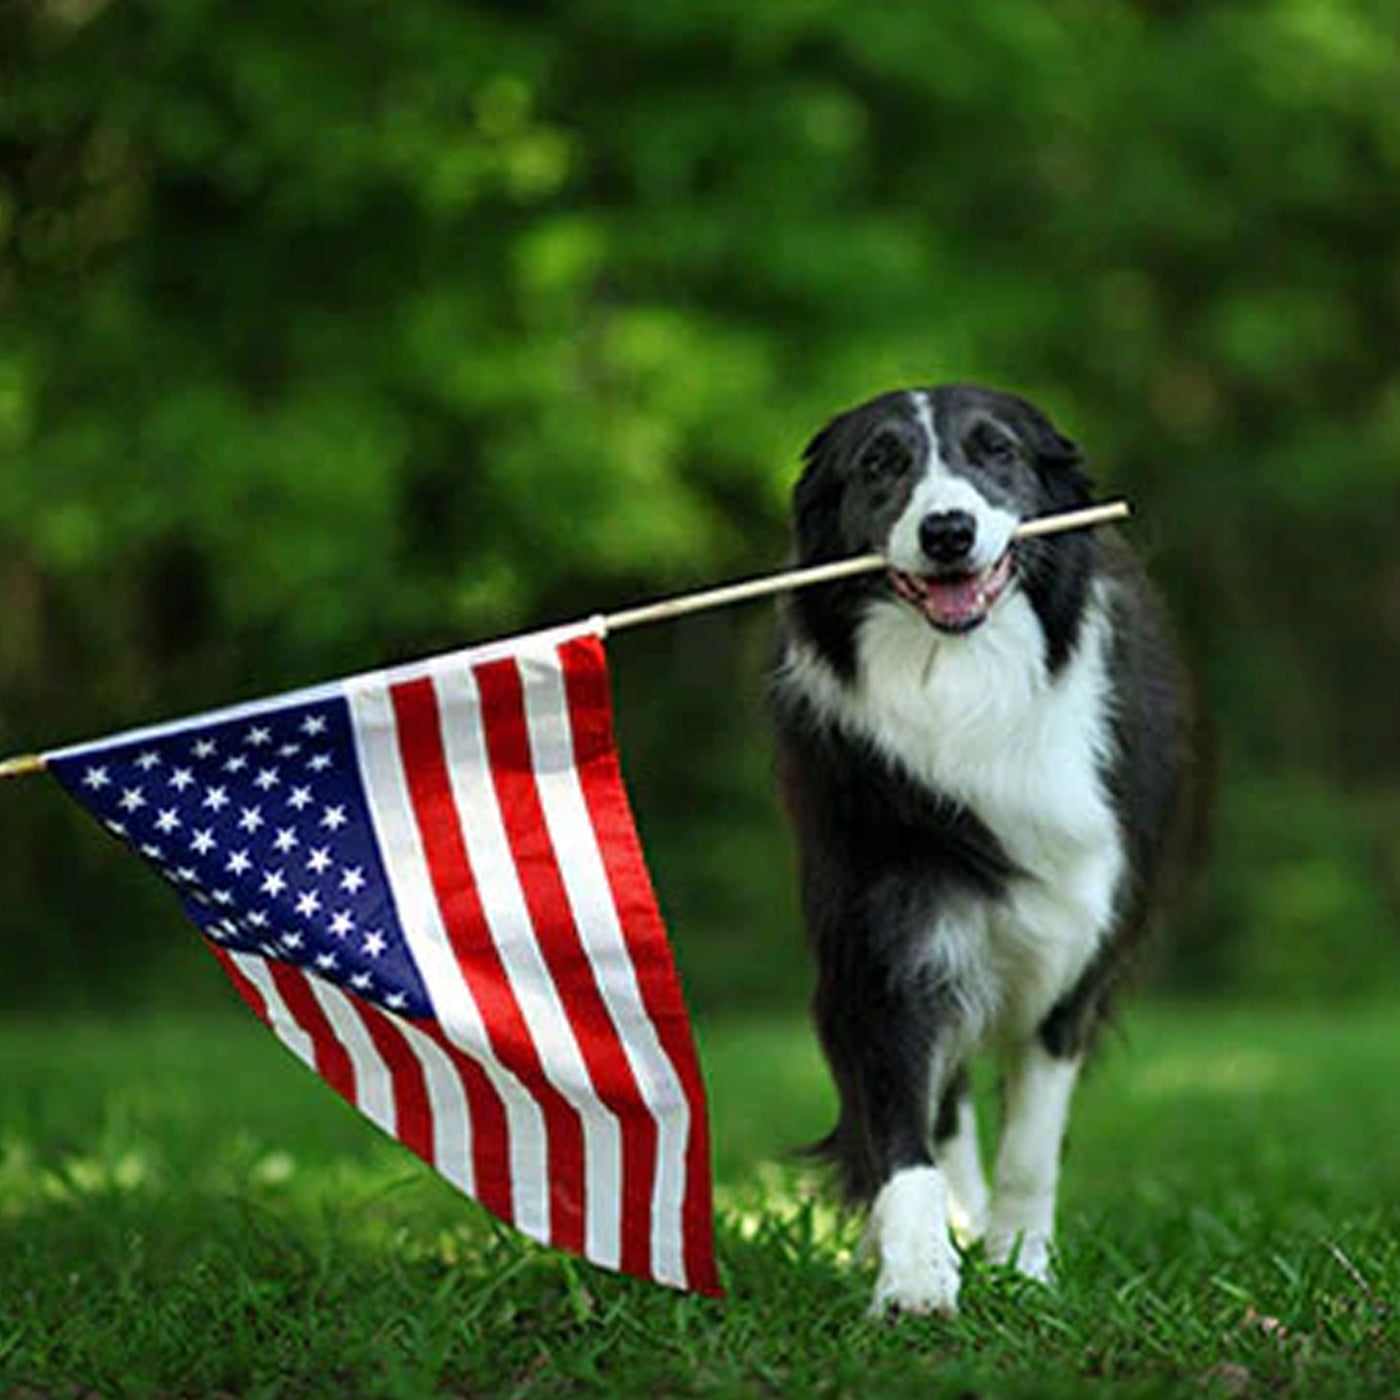 Dog carrying American flag for Pets for Patriots